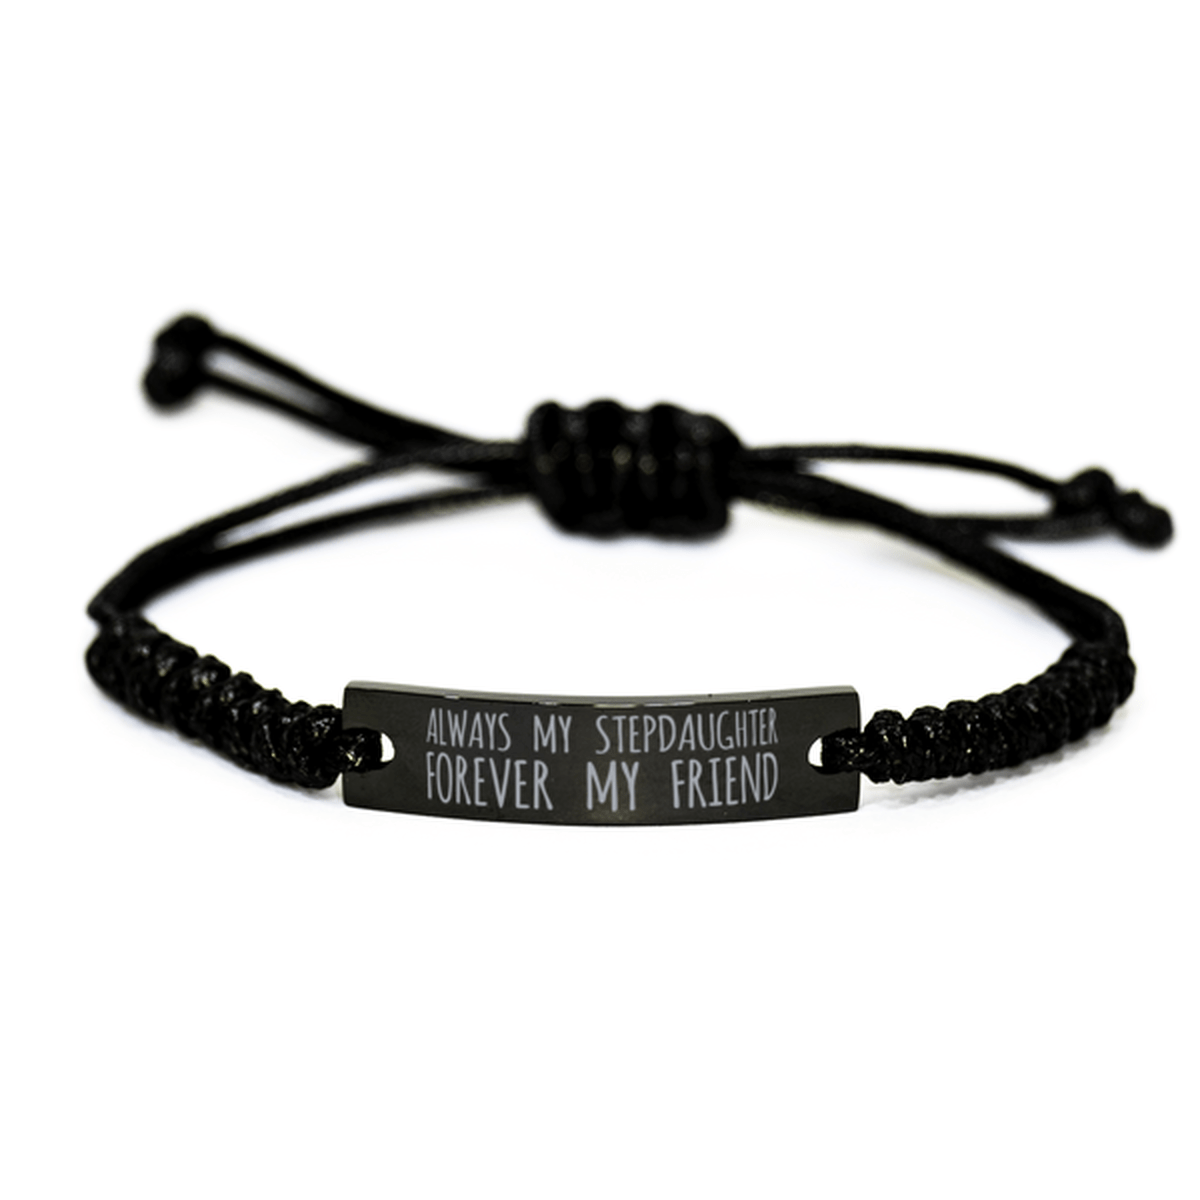 Inspirational Stepdaughter Black Rope Bracelet, Always My Stepdaughter Forever My Friend, Best Birthday Gifts For Family